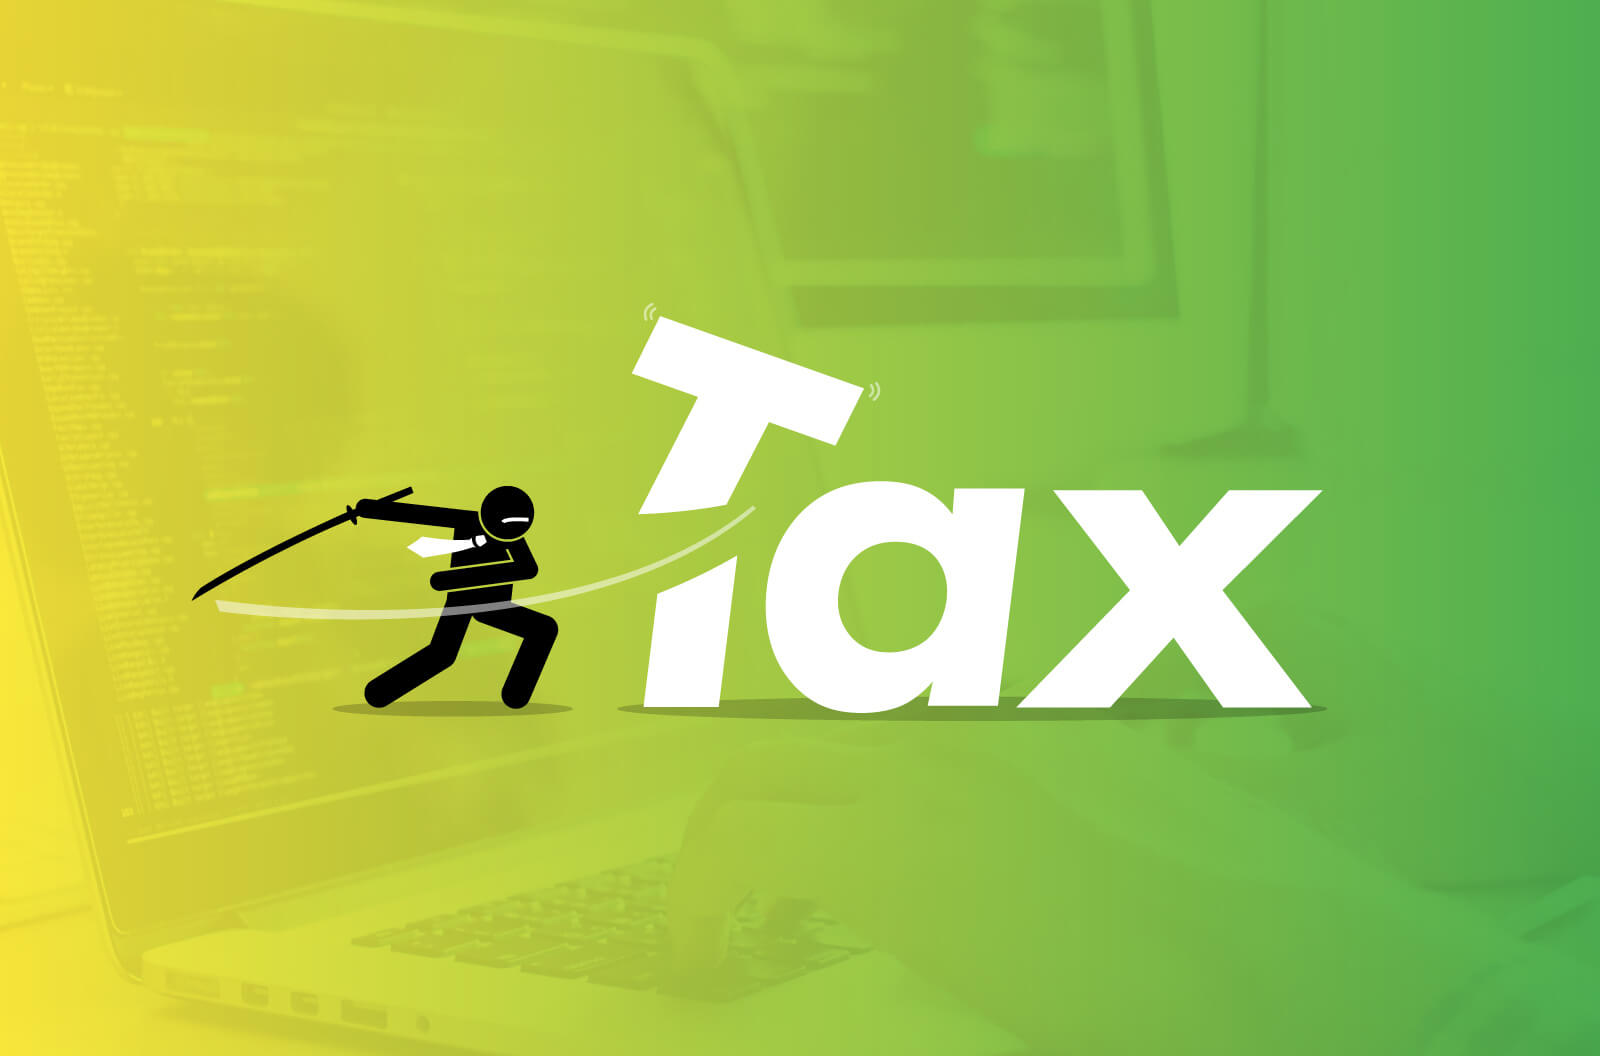 2023 Website Tax Guide - What Website Costs Can I Claim?